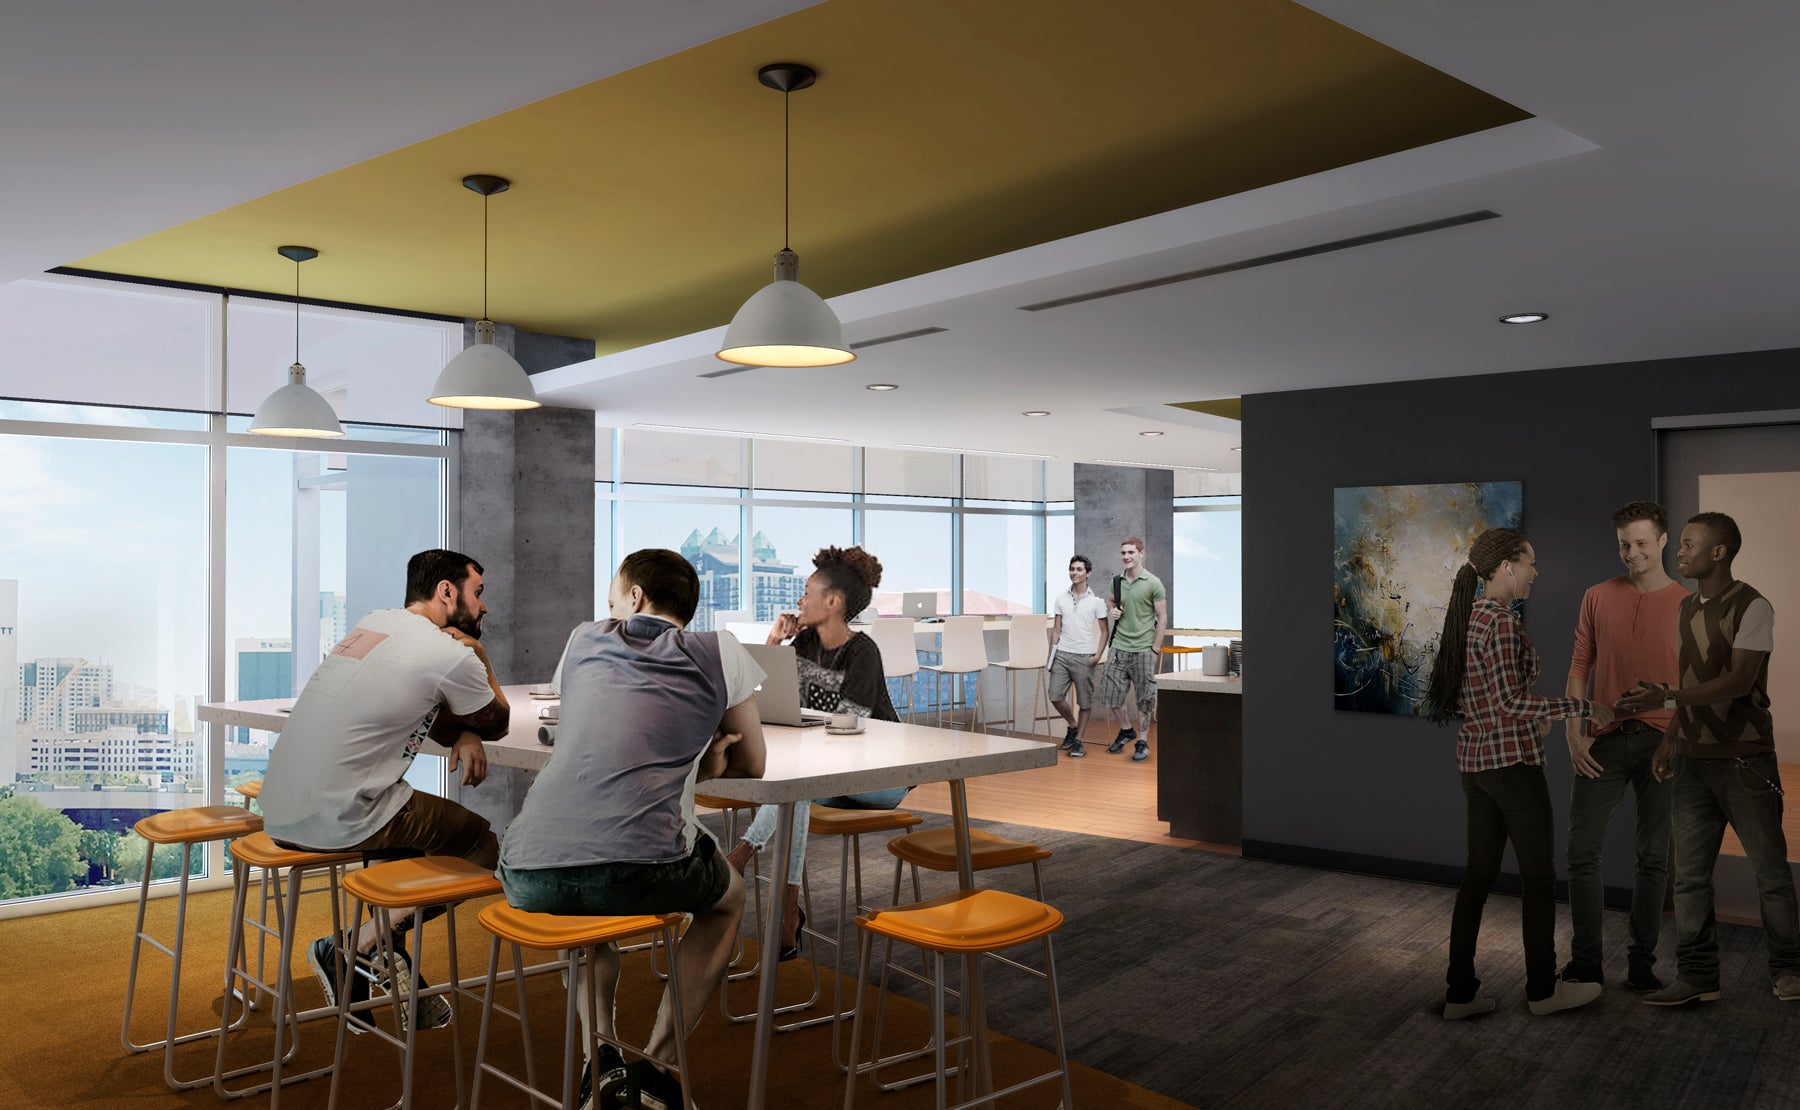 Each floor of the residences also features a resident-only club room with lounges, a coffee bar and space for community activities.